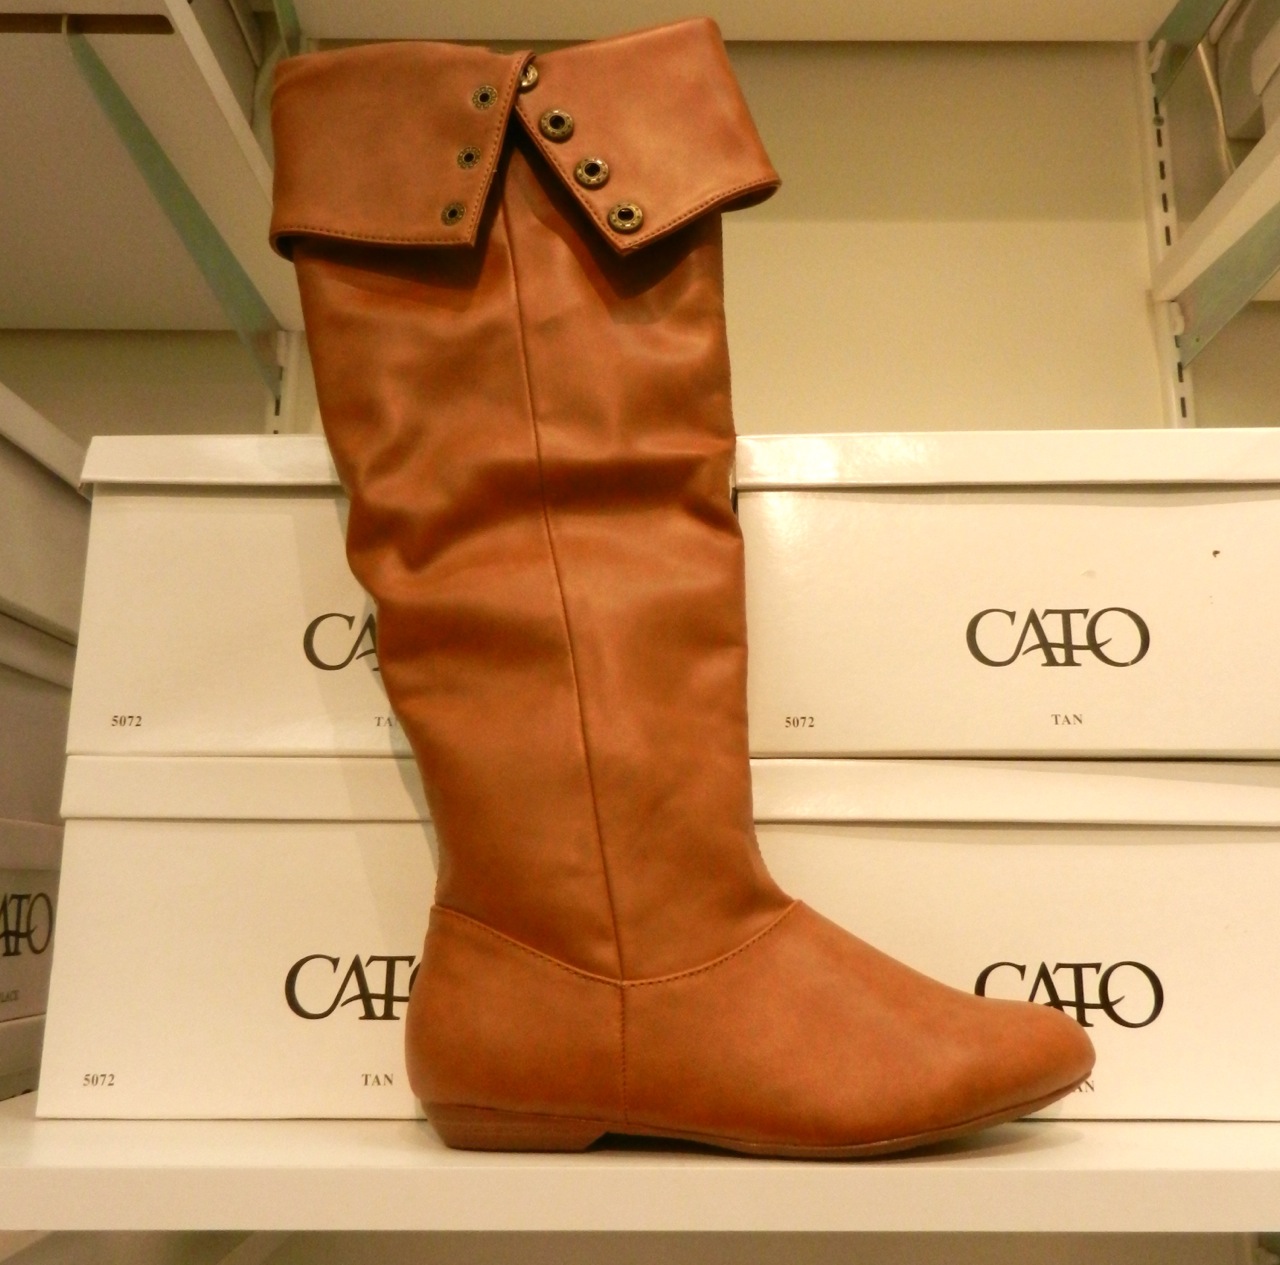 Cato Fashions: A New Statement of Style - Economy of Style